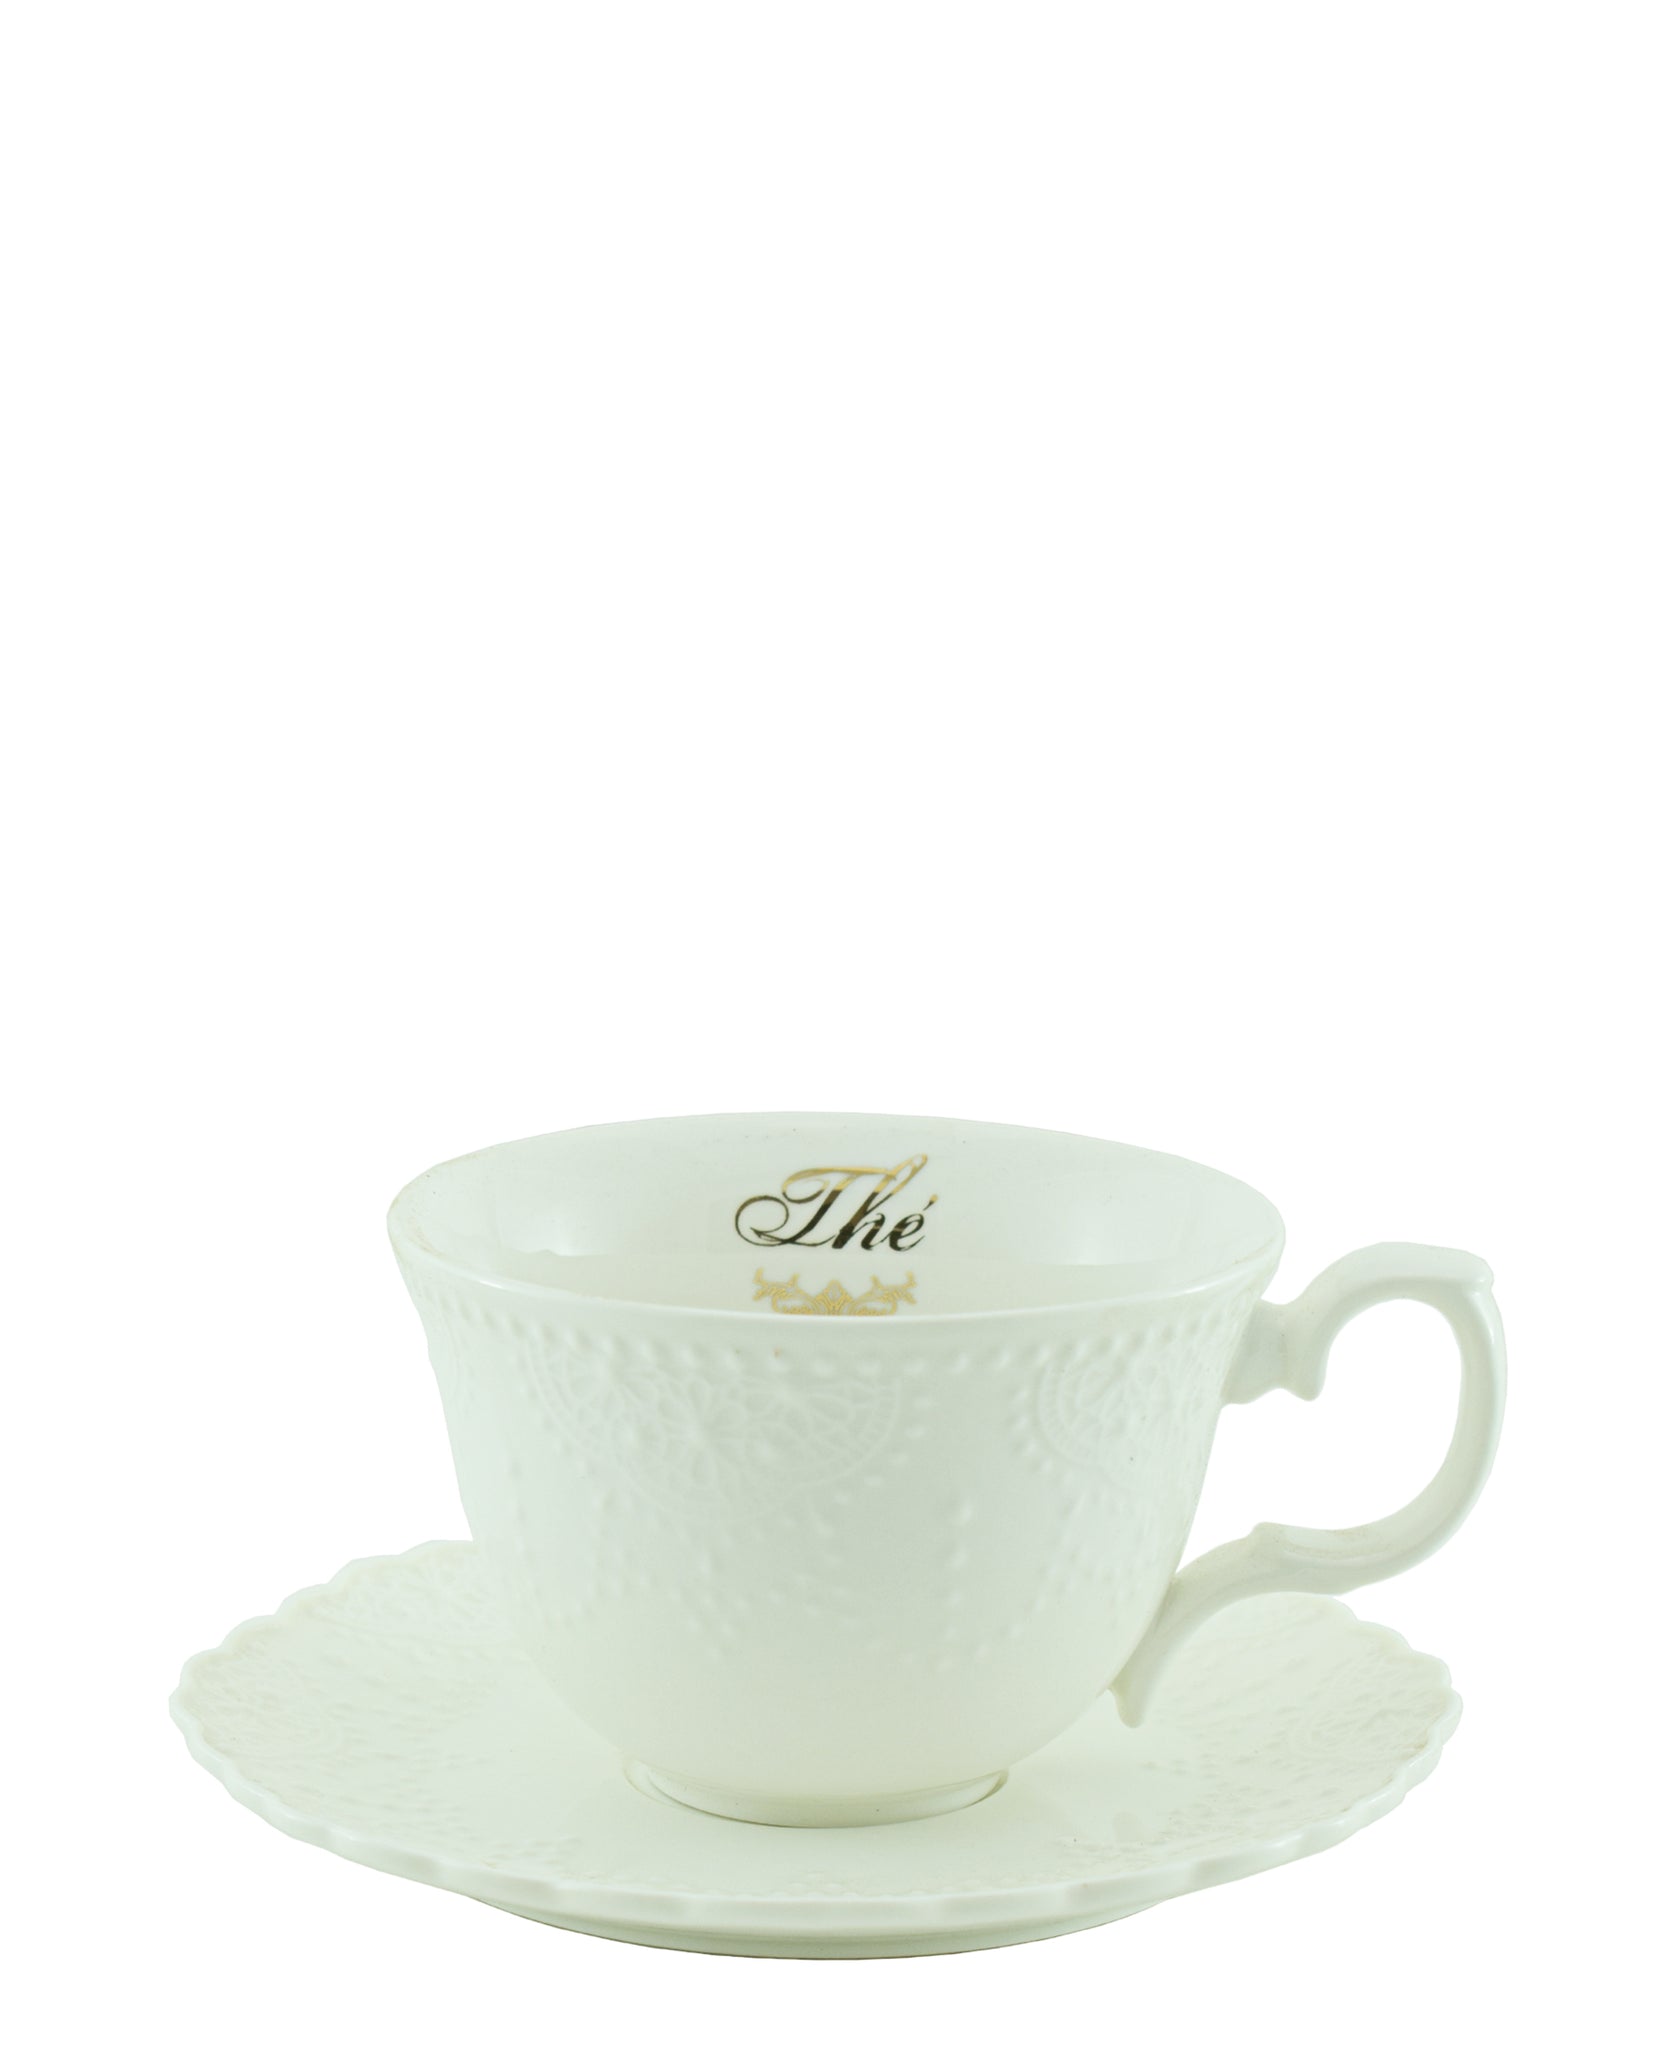 Maison Chic oversize Tea Cup And Saucer